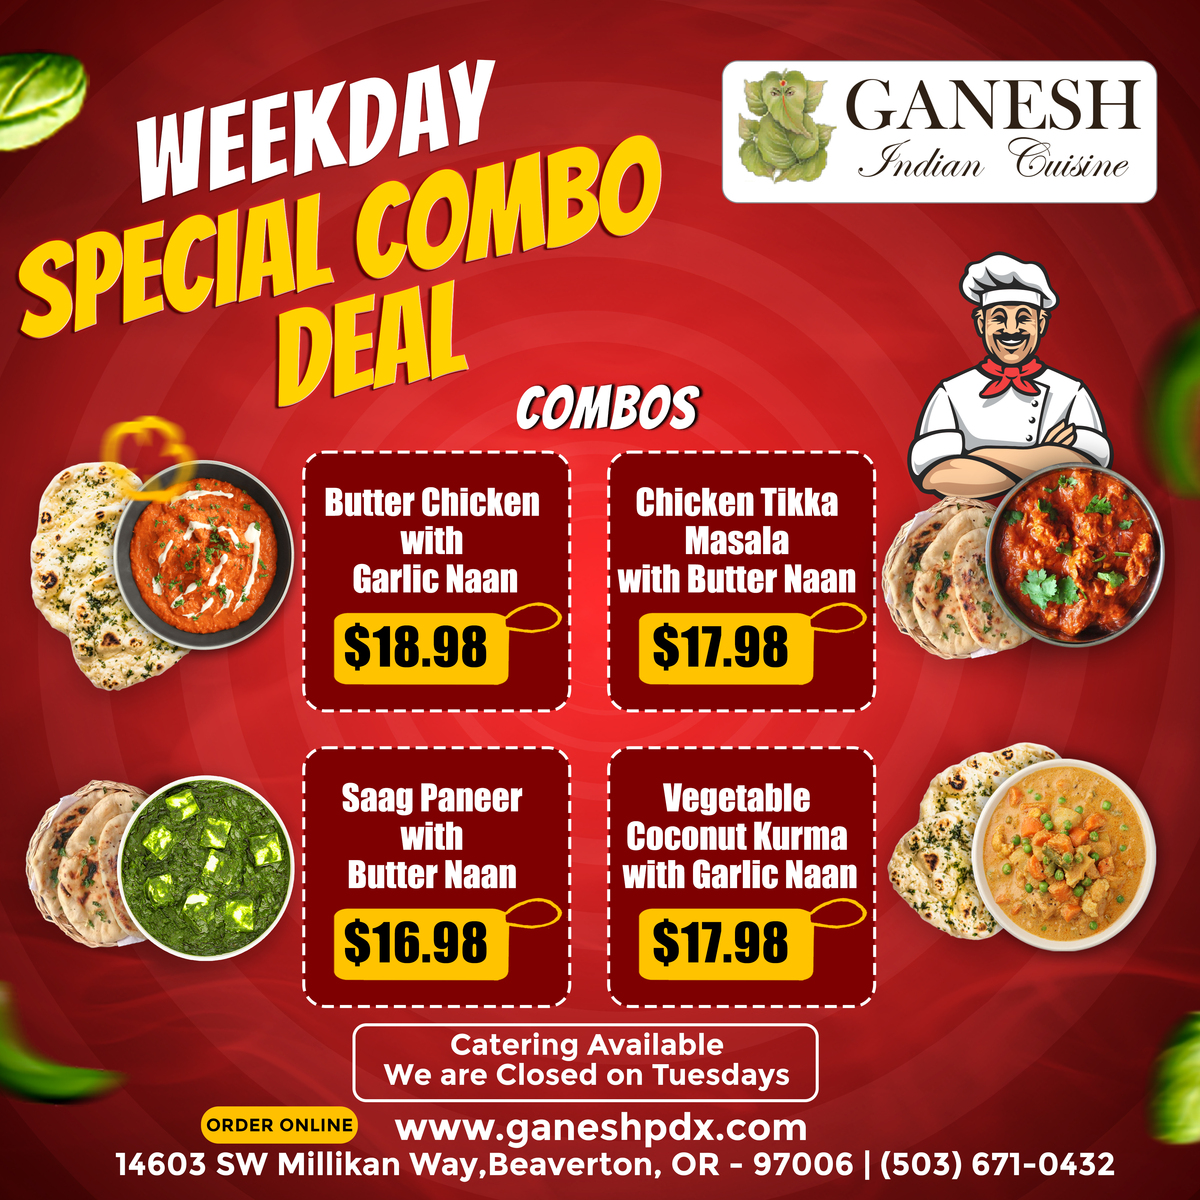 Weekday Special Combo Deal